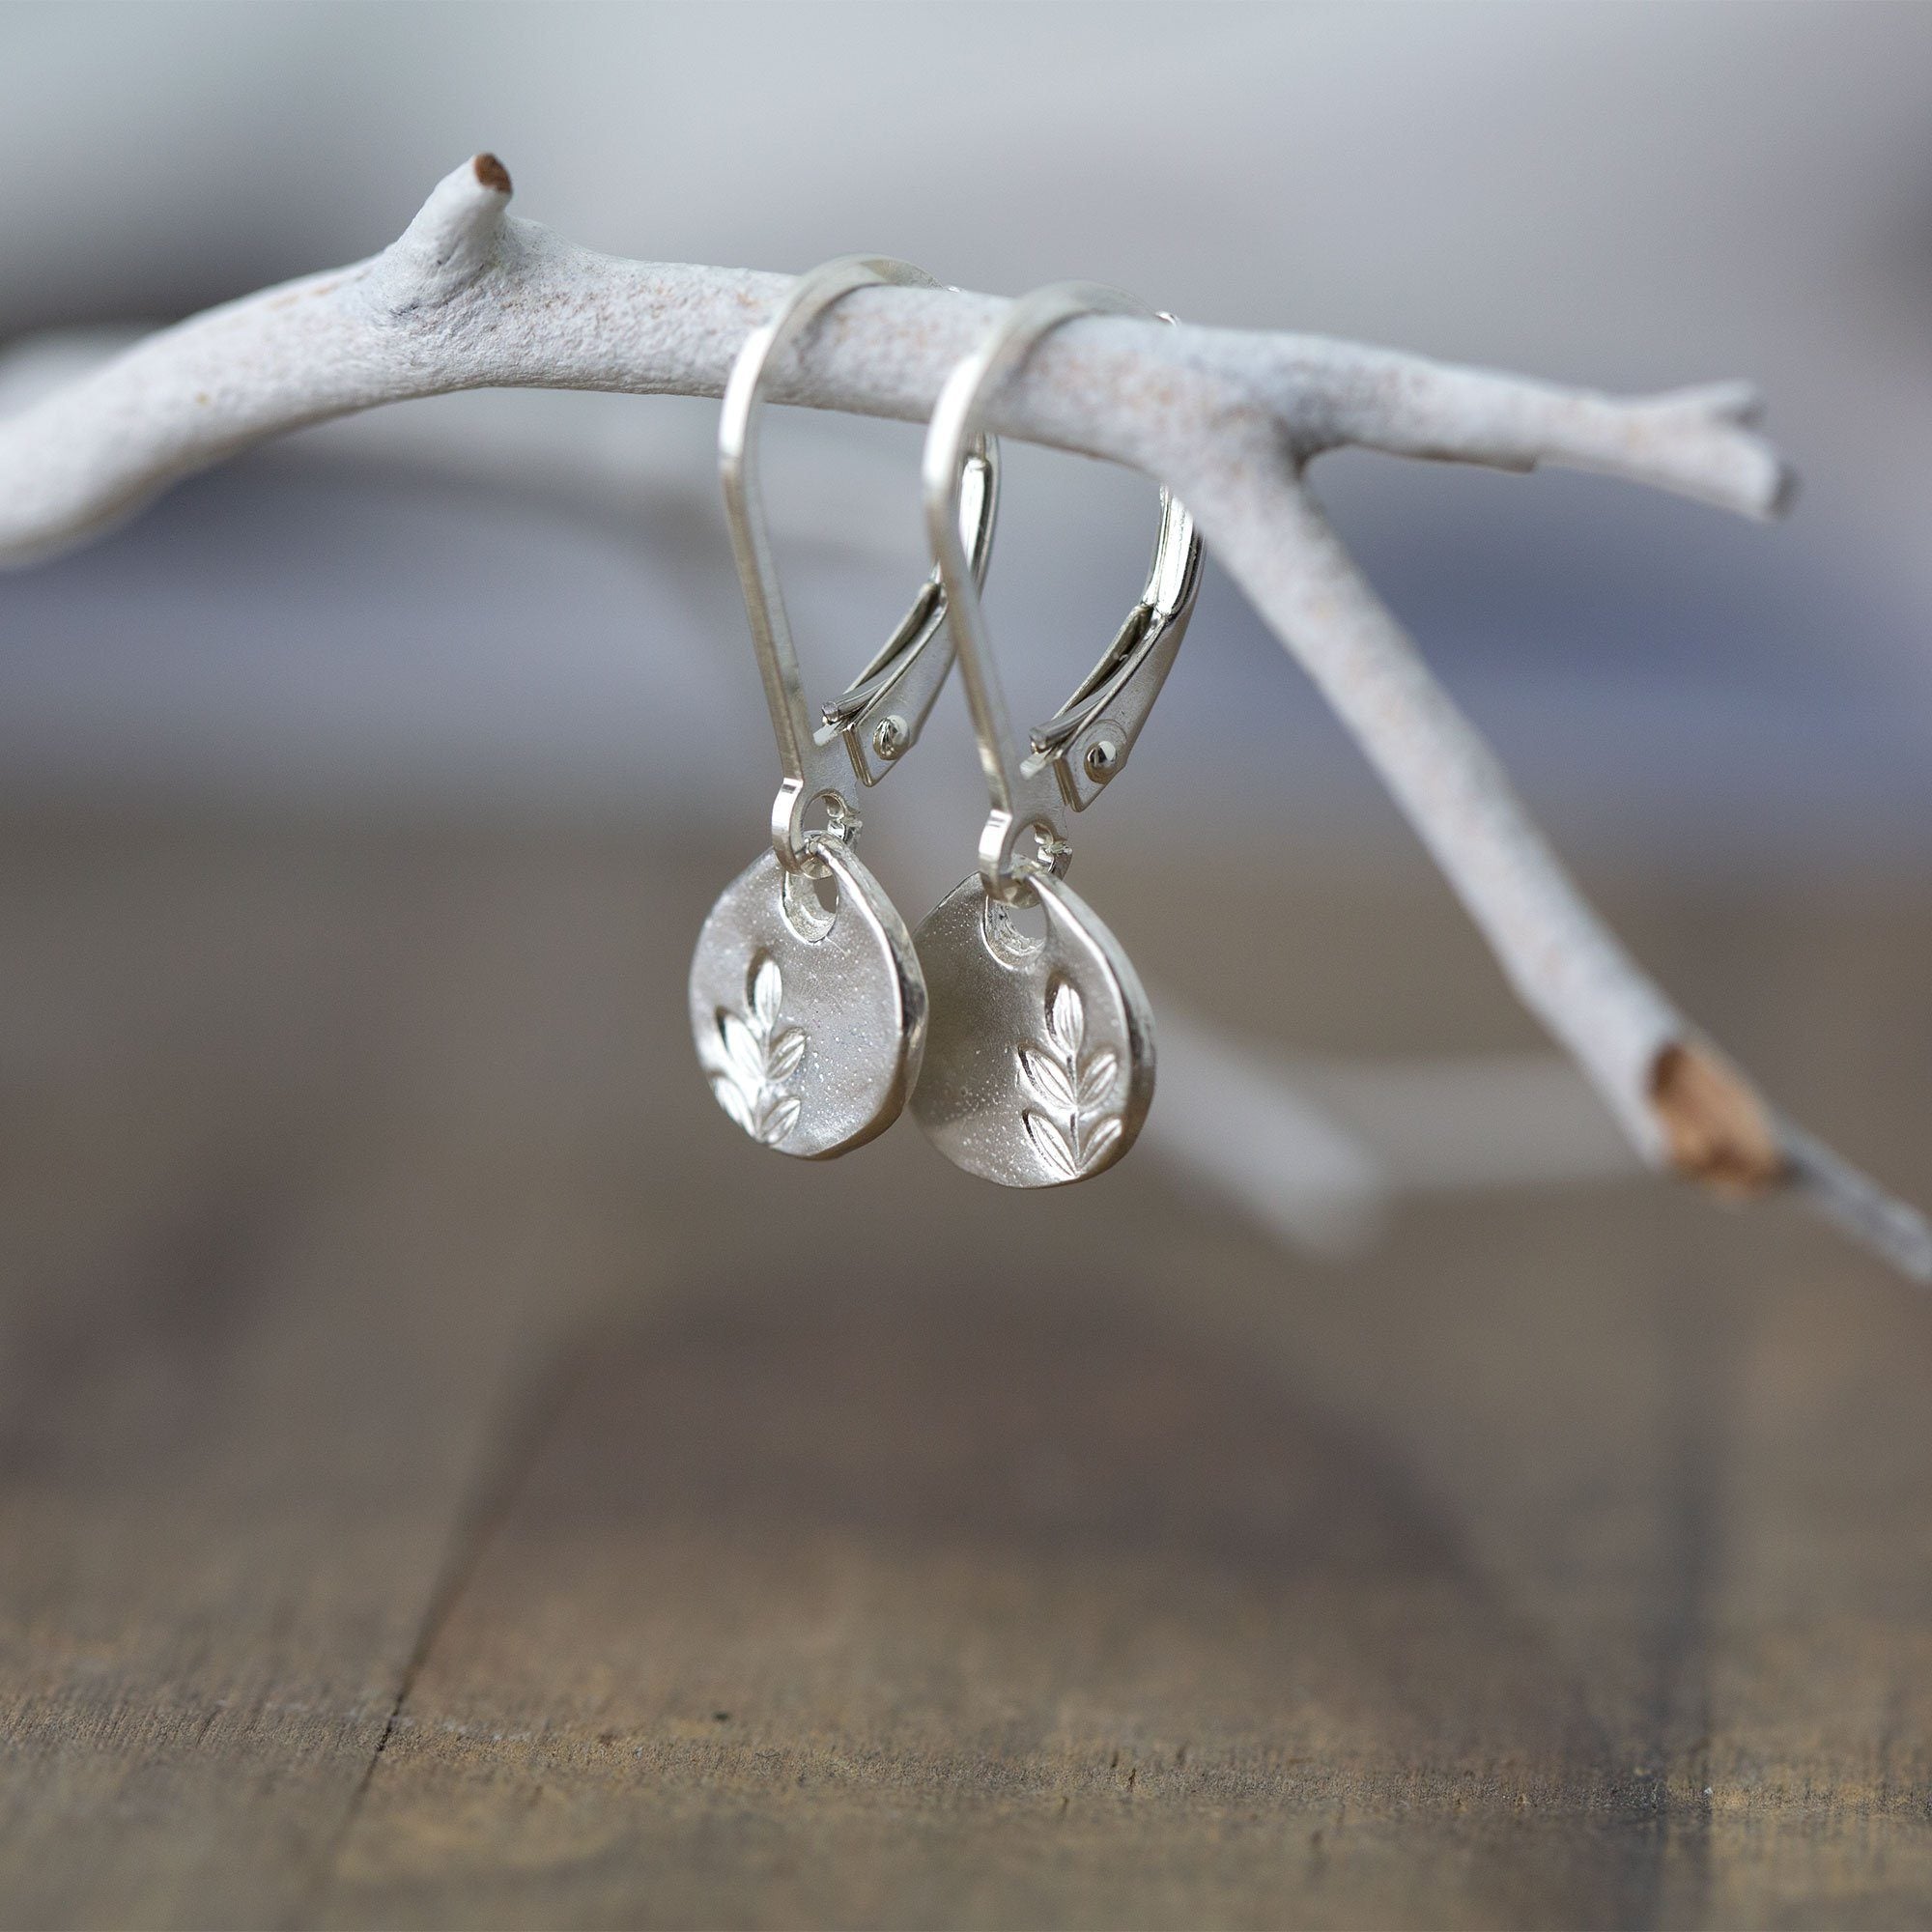 Tiny Stamped Leaf Leverback Earrings - Handmade Jewelry by Burnish